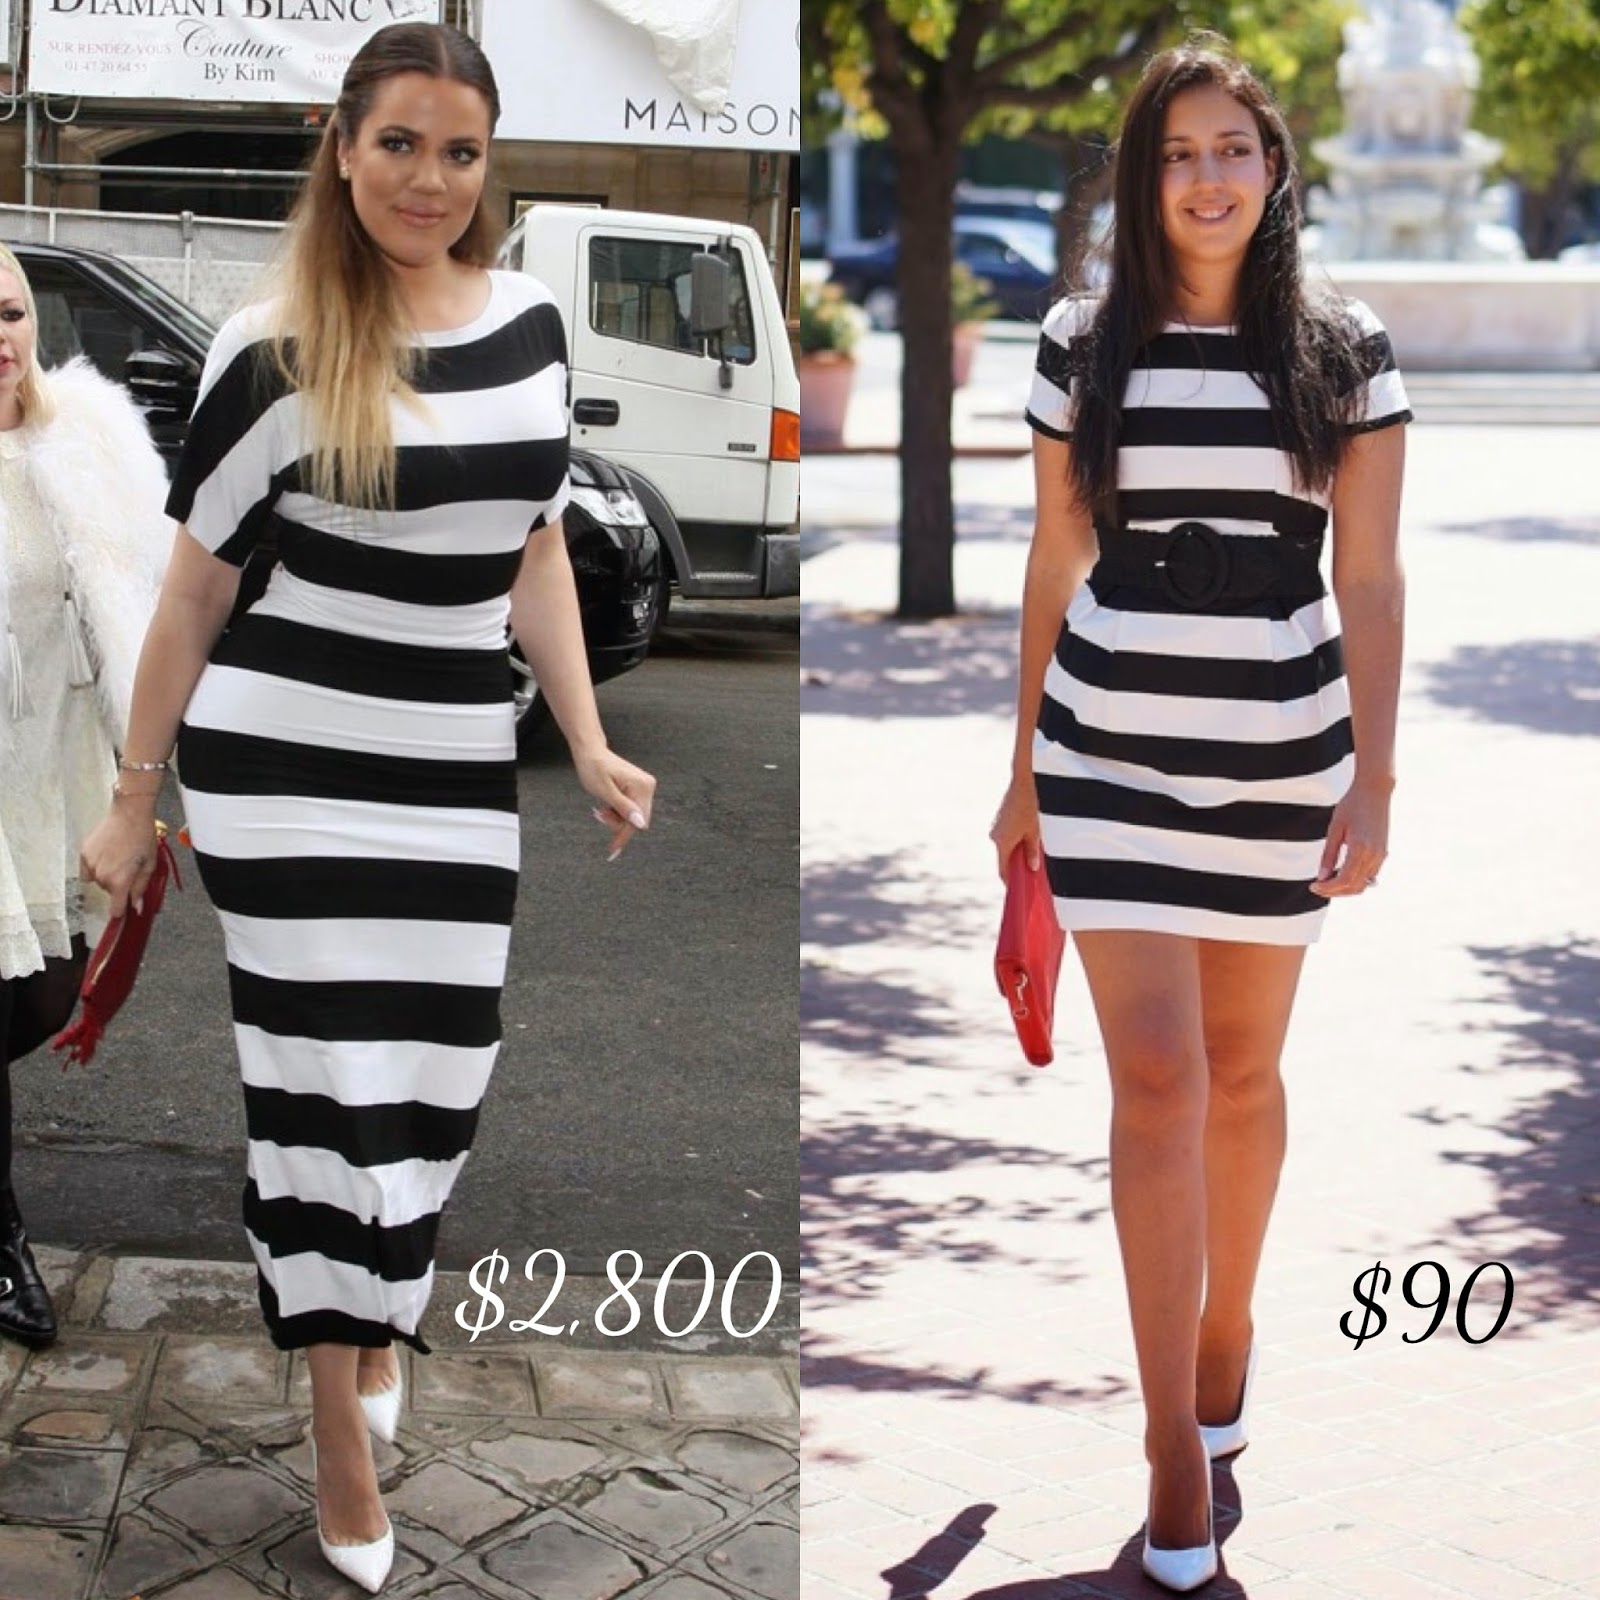 Khloe Kardashian's Look for Less, Khloe Kardashian's Striped Two Piece Outfit, H&M Striped Dress, White Pumps, Fashion Blogger, Celebrity Look For Less